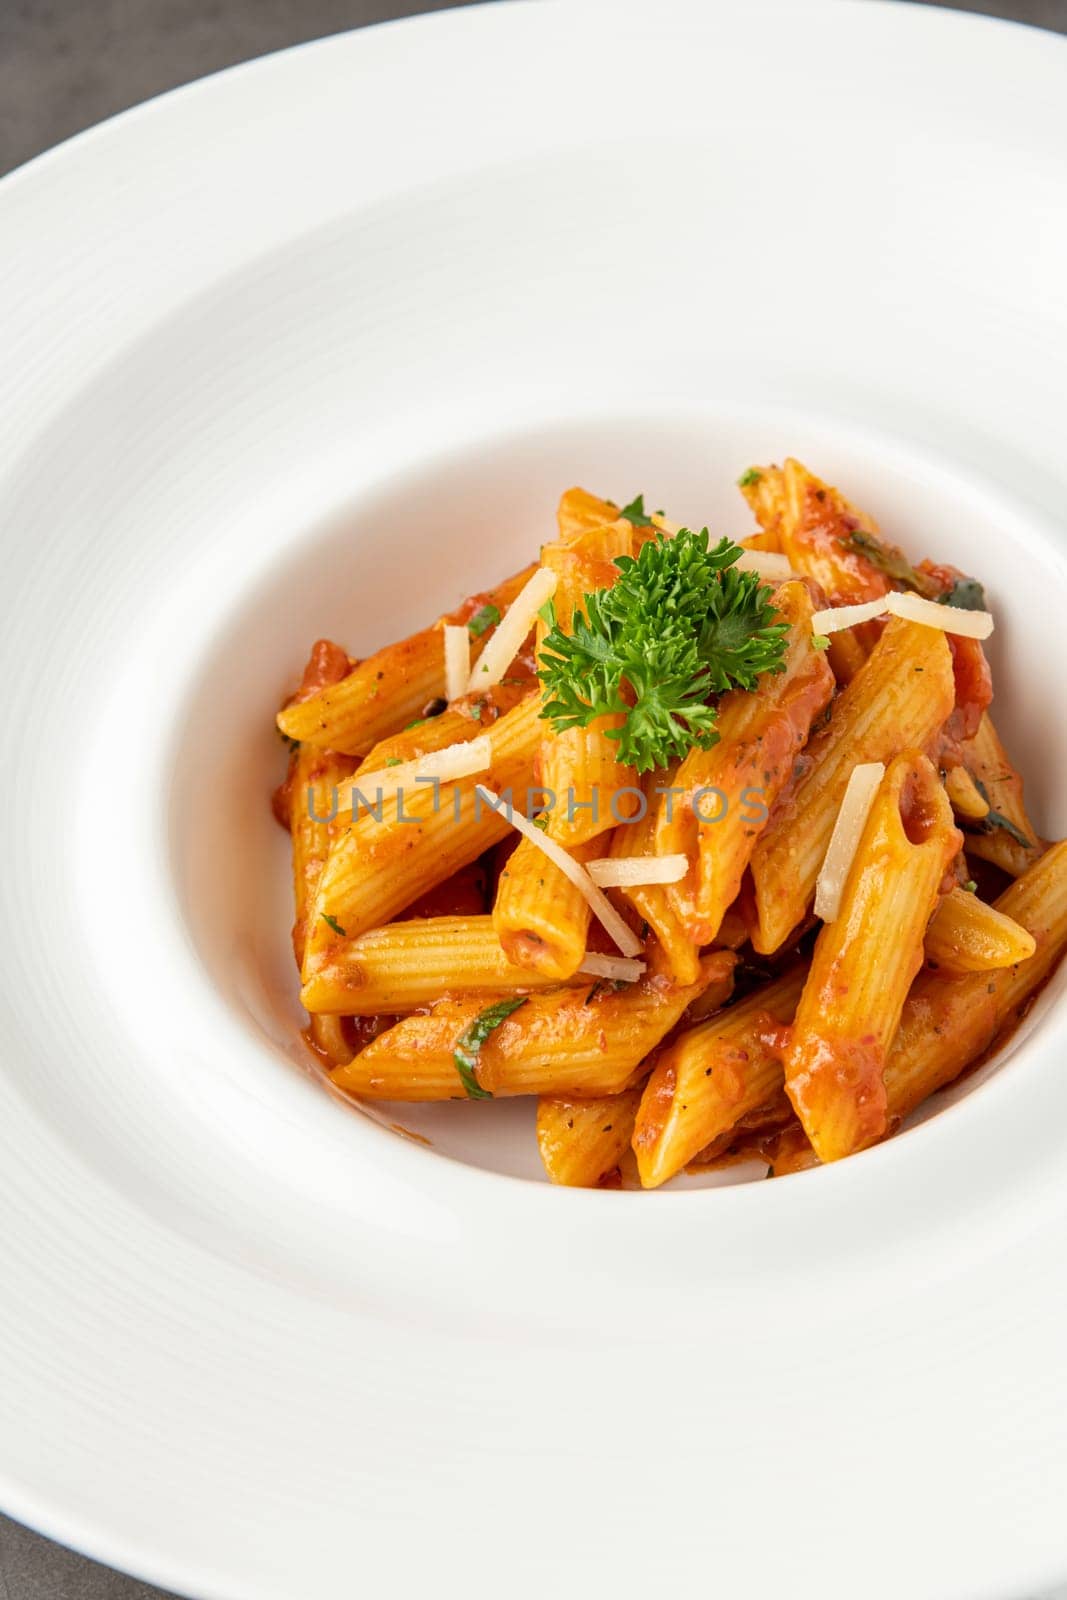 Penne pasta in tomato sauce, tomatoes decorated with parsley on a wooden background